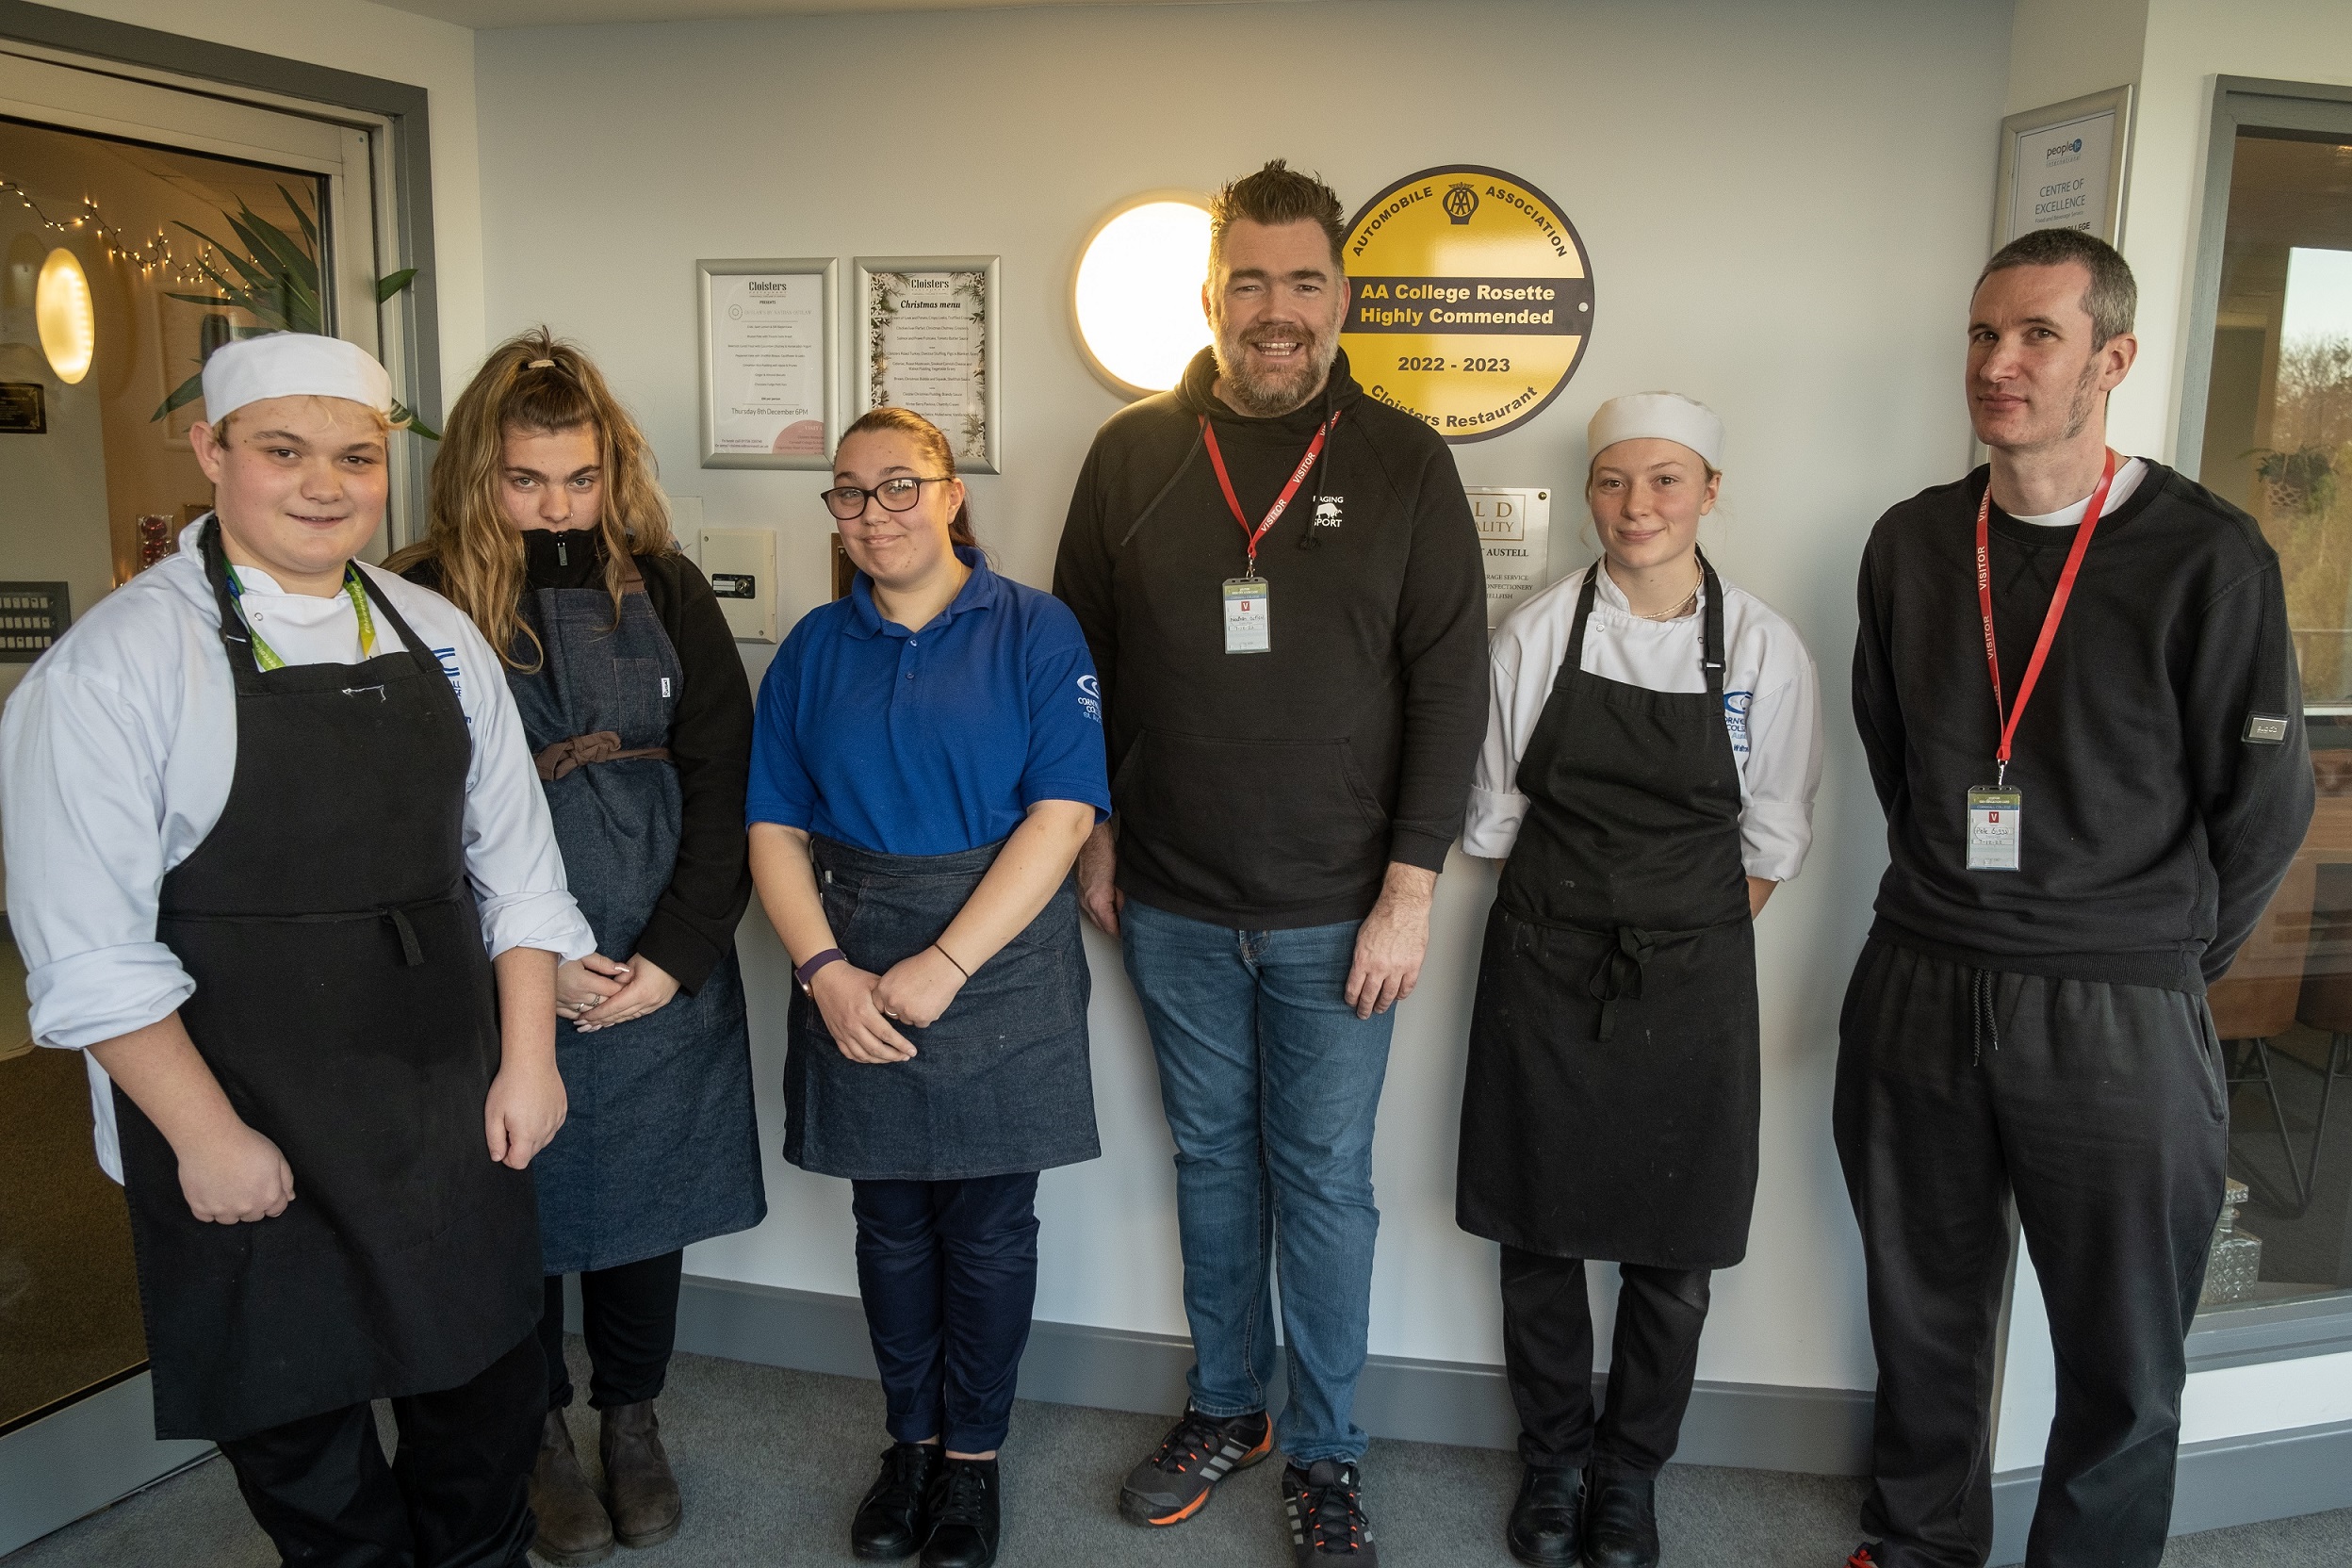 Nathan Outlaw and hospitality students at St Austell